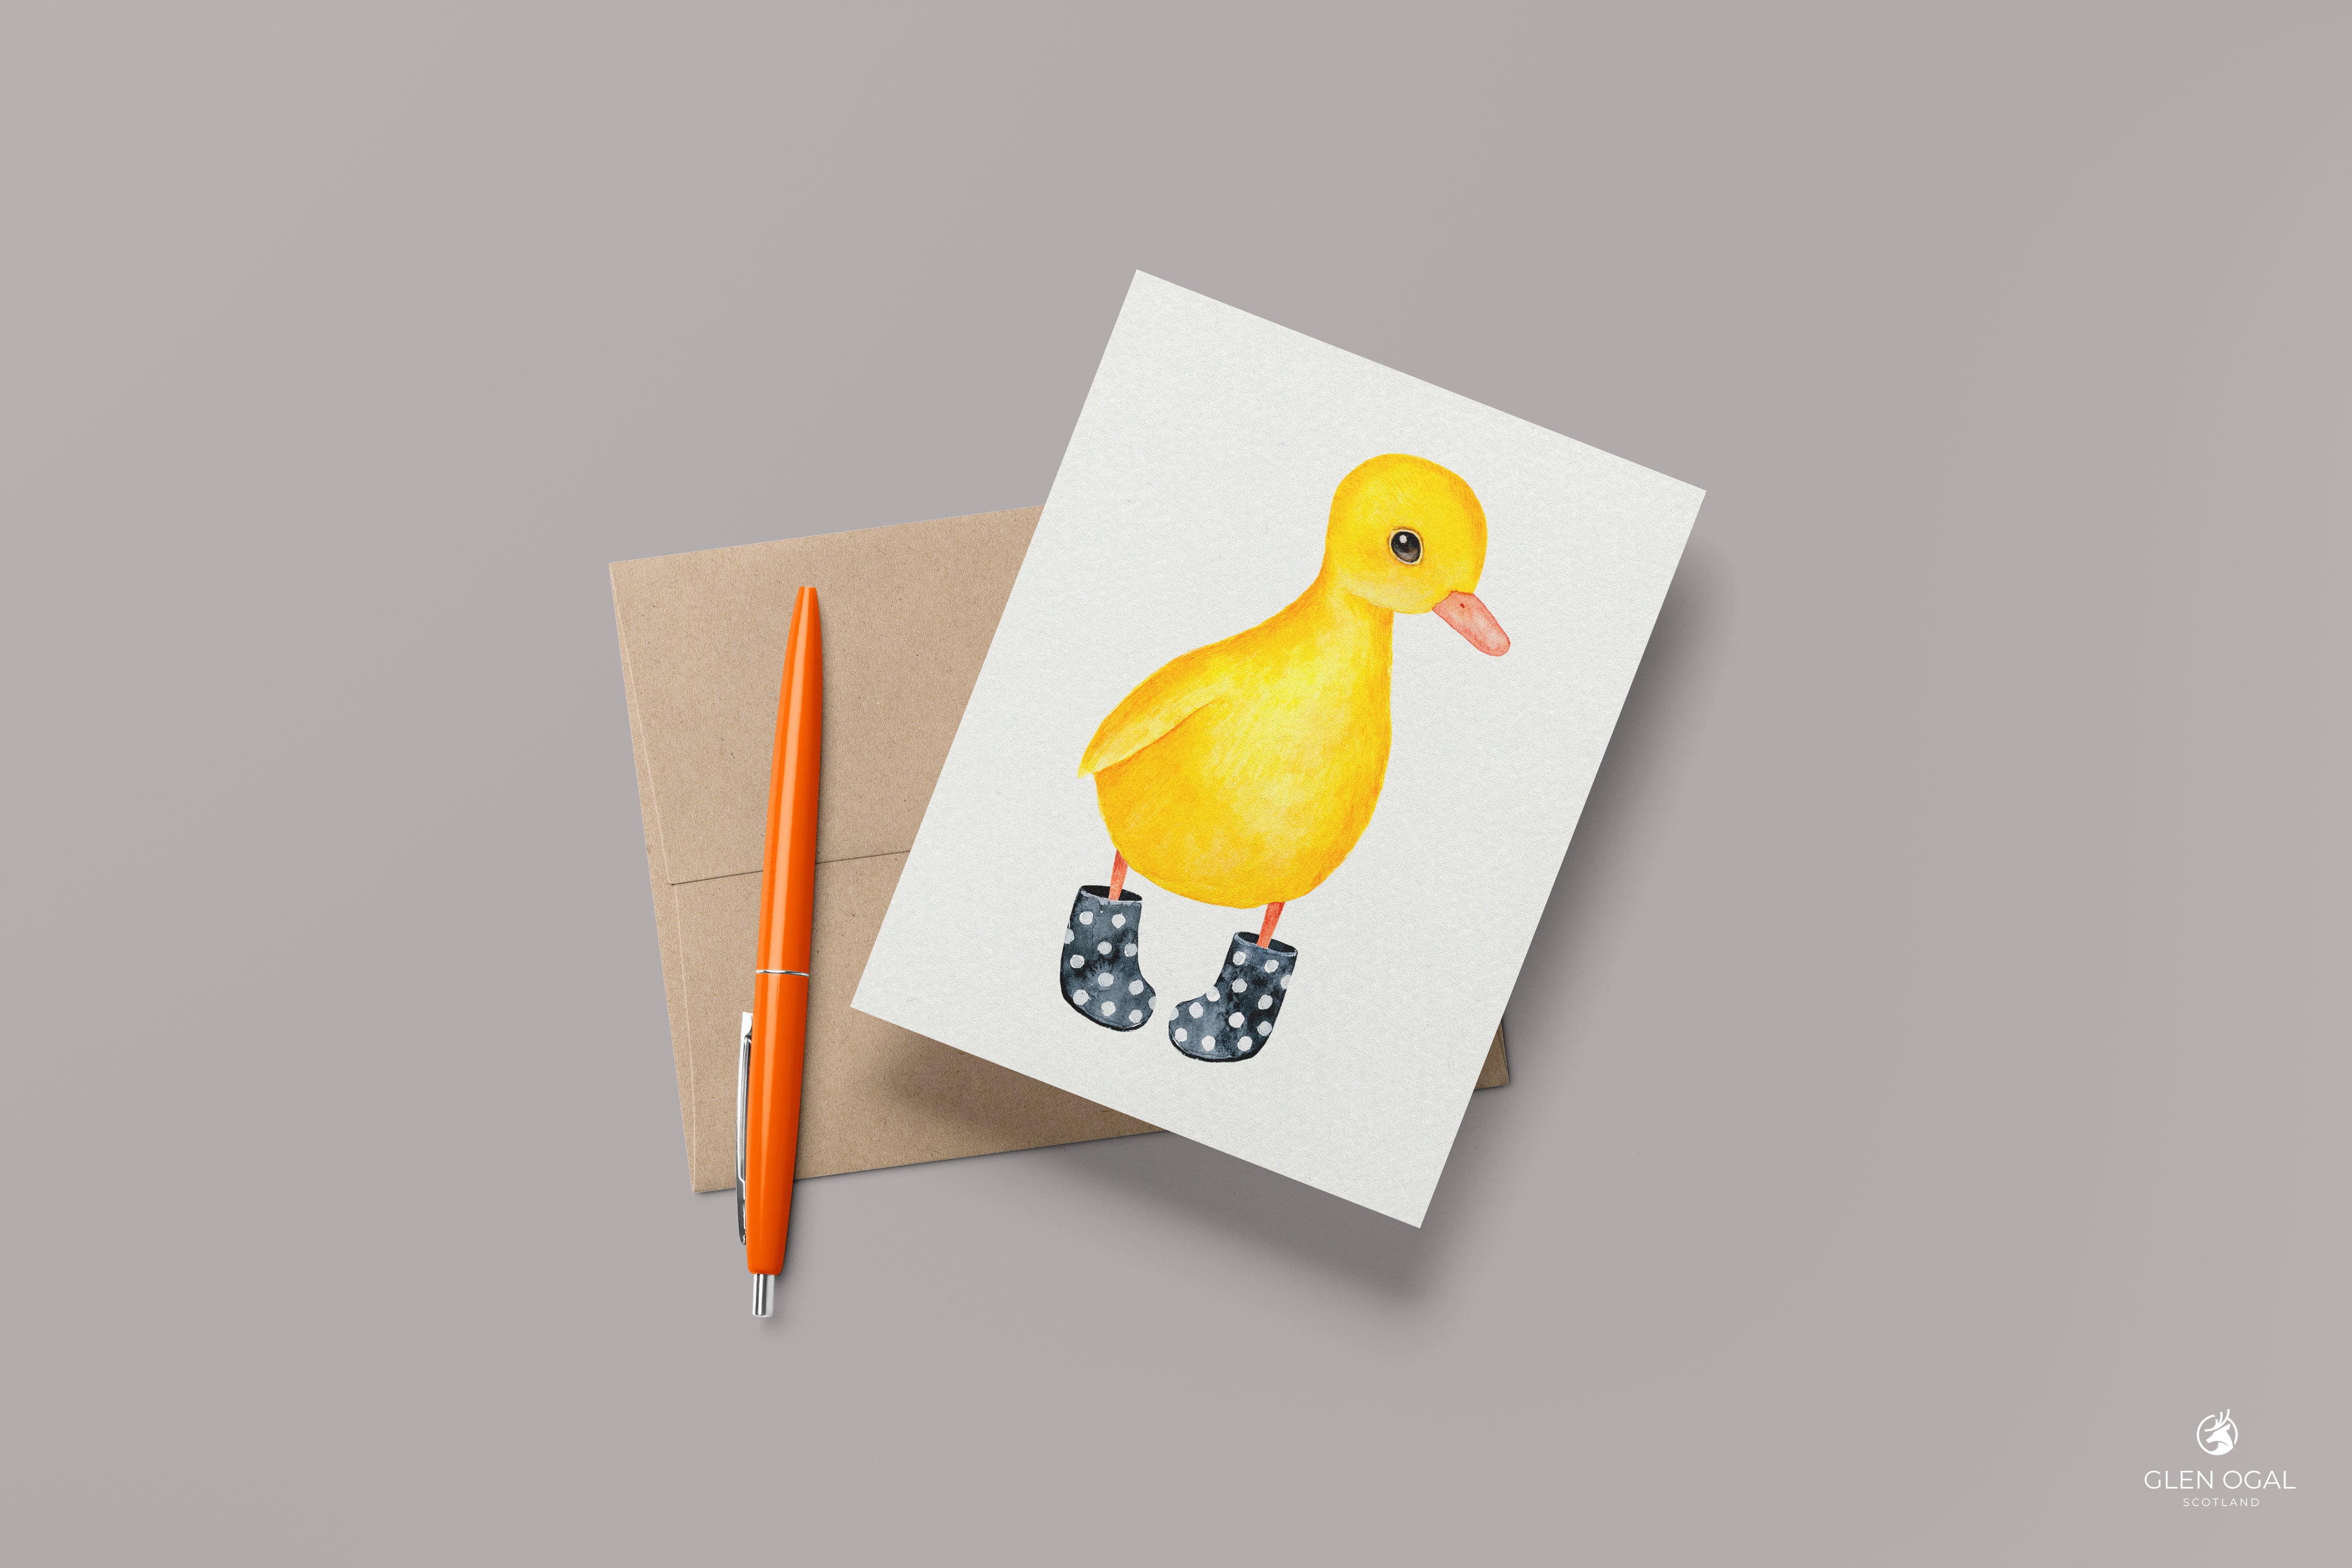 Pack of 5 Duck in Wellies Note Cards